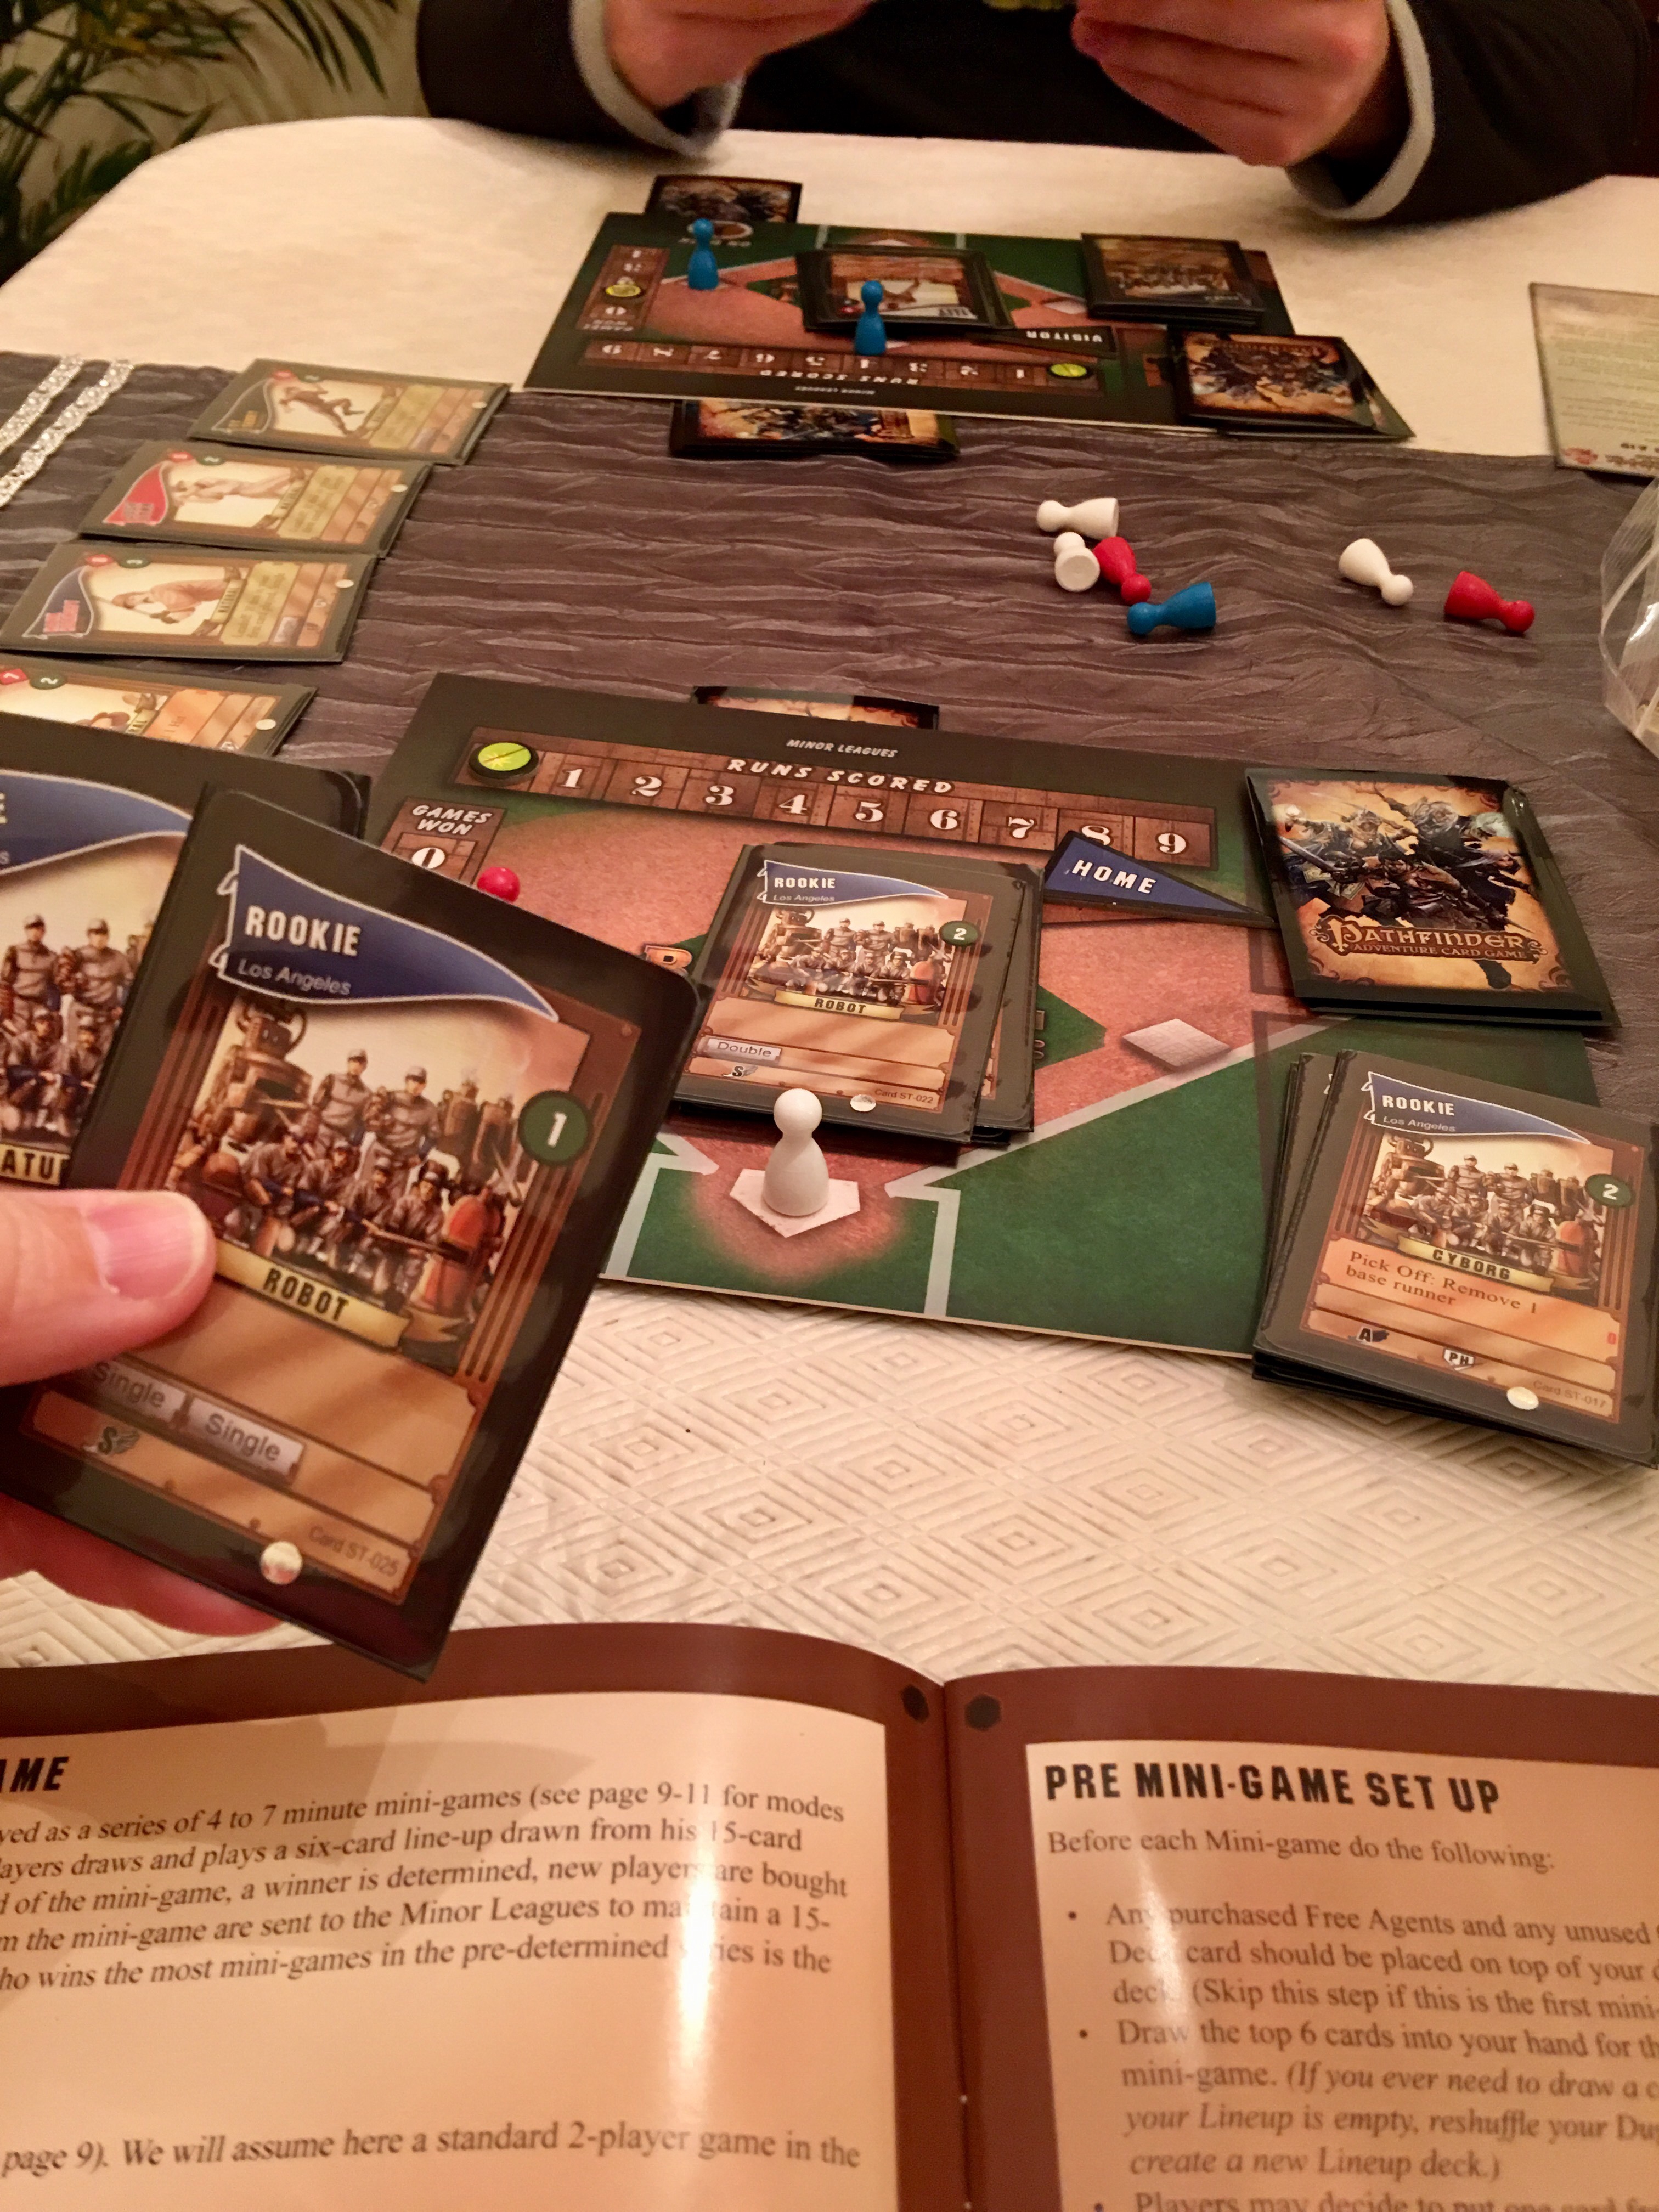 Spice up! With Baseball Highlights: 2045 – Board Game Gumbo